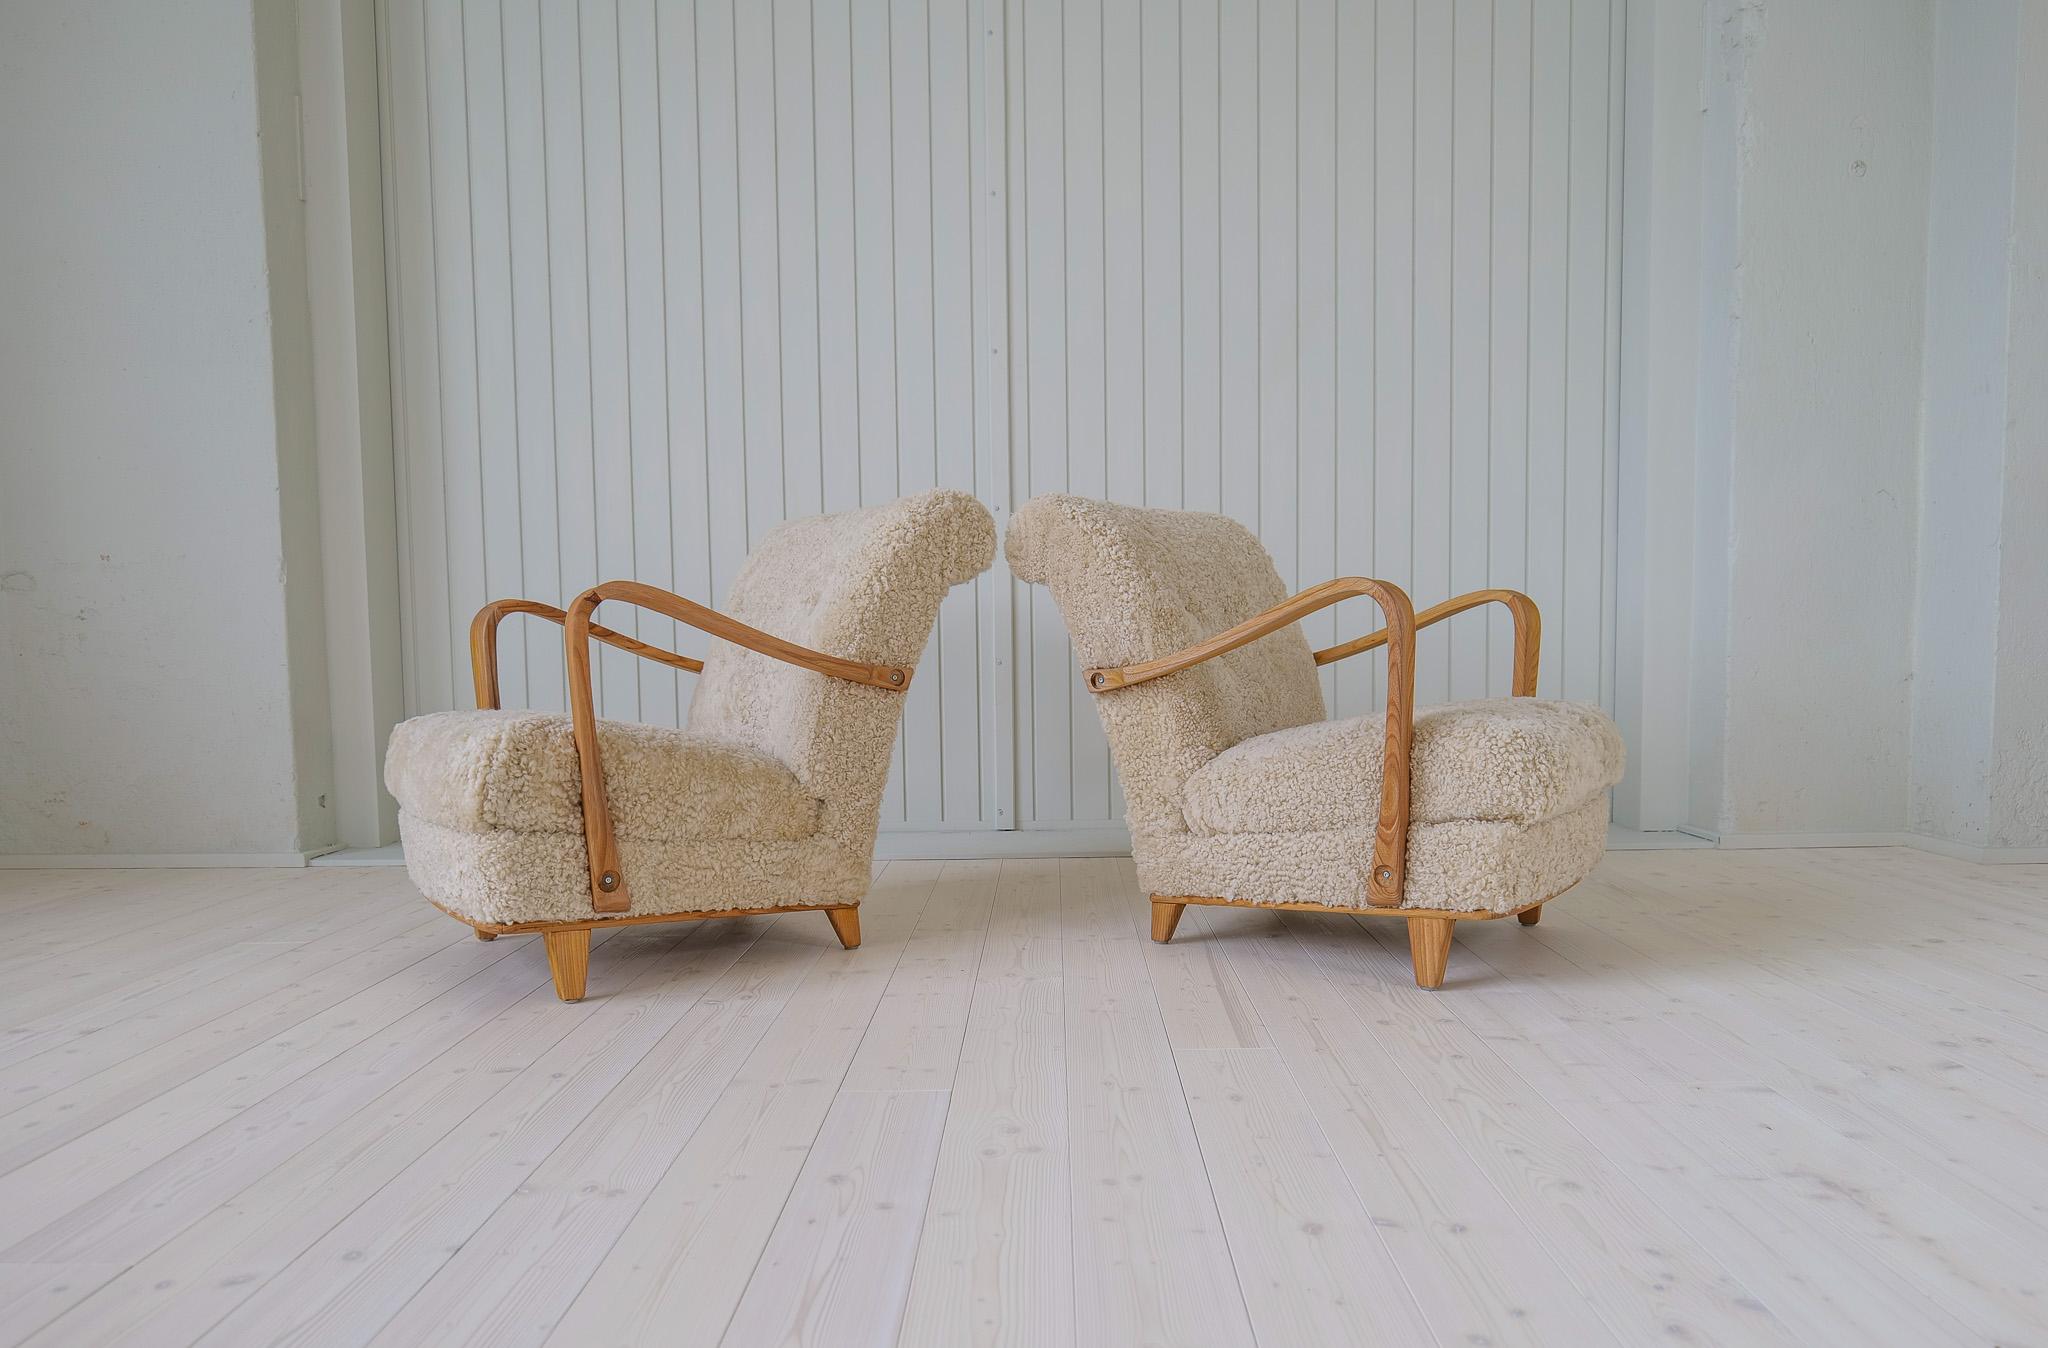 Swedish Modern Lounge Chairs in Shearling / Sheepskin and Elm, 1940s For Sale 4